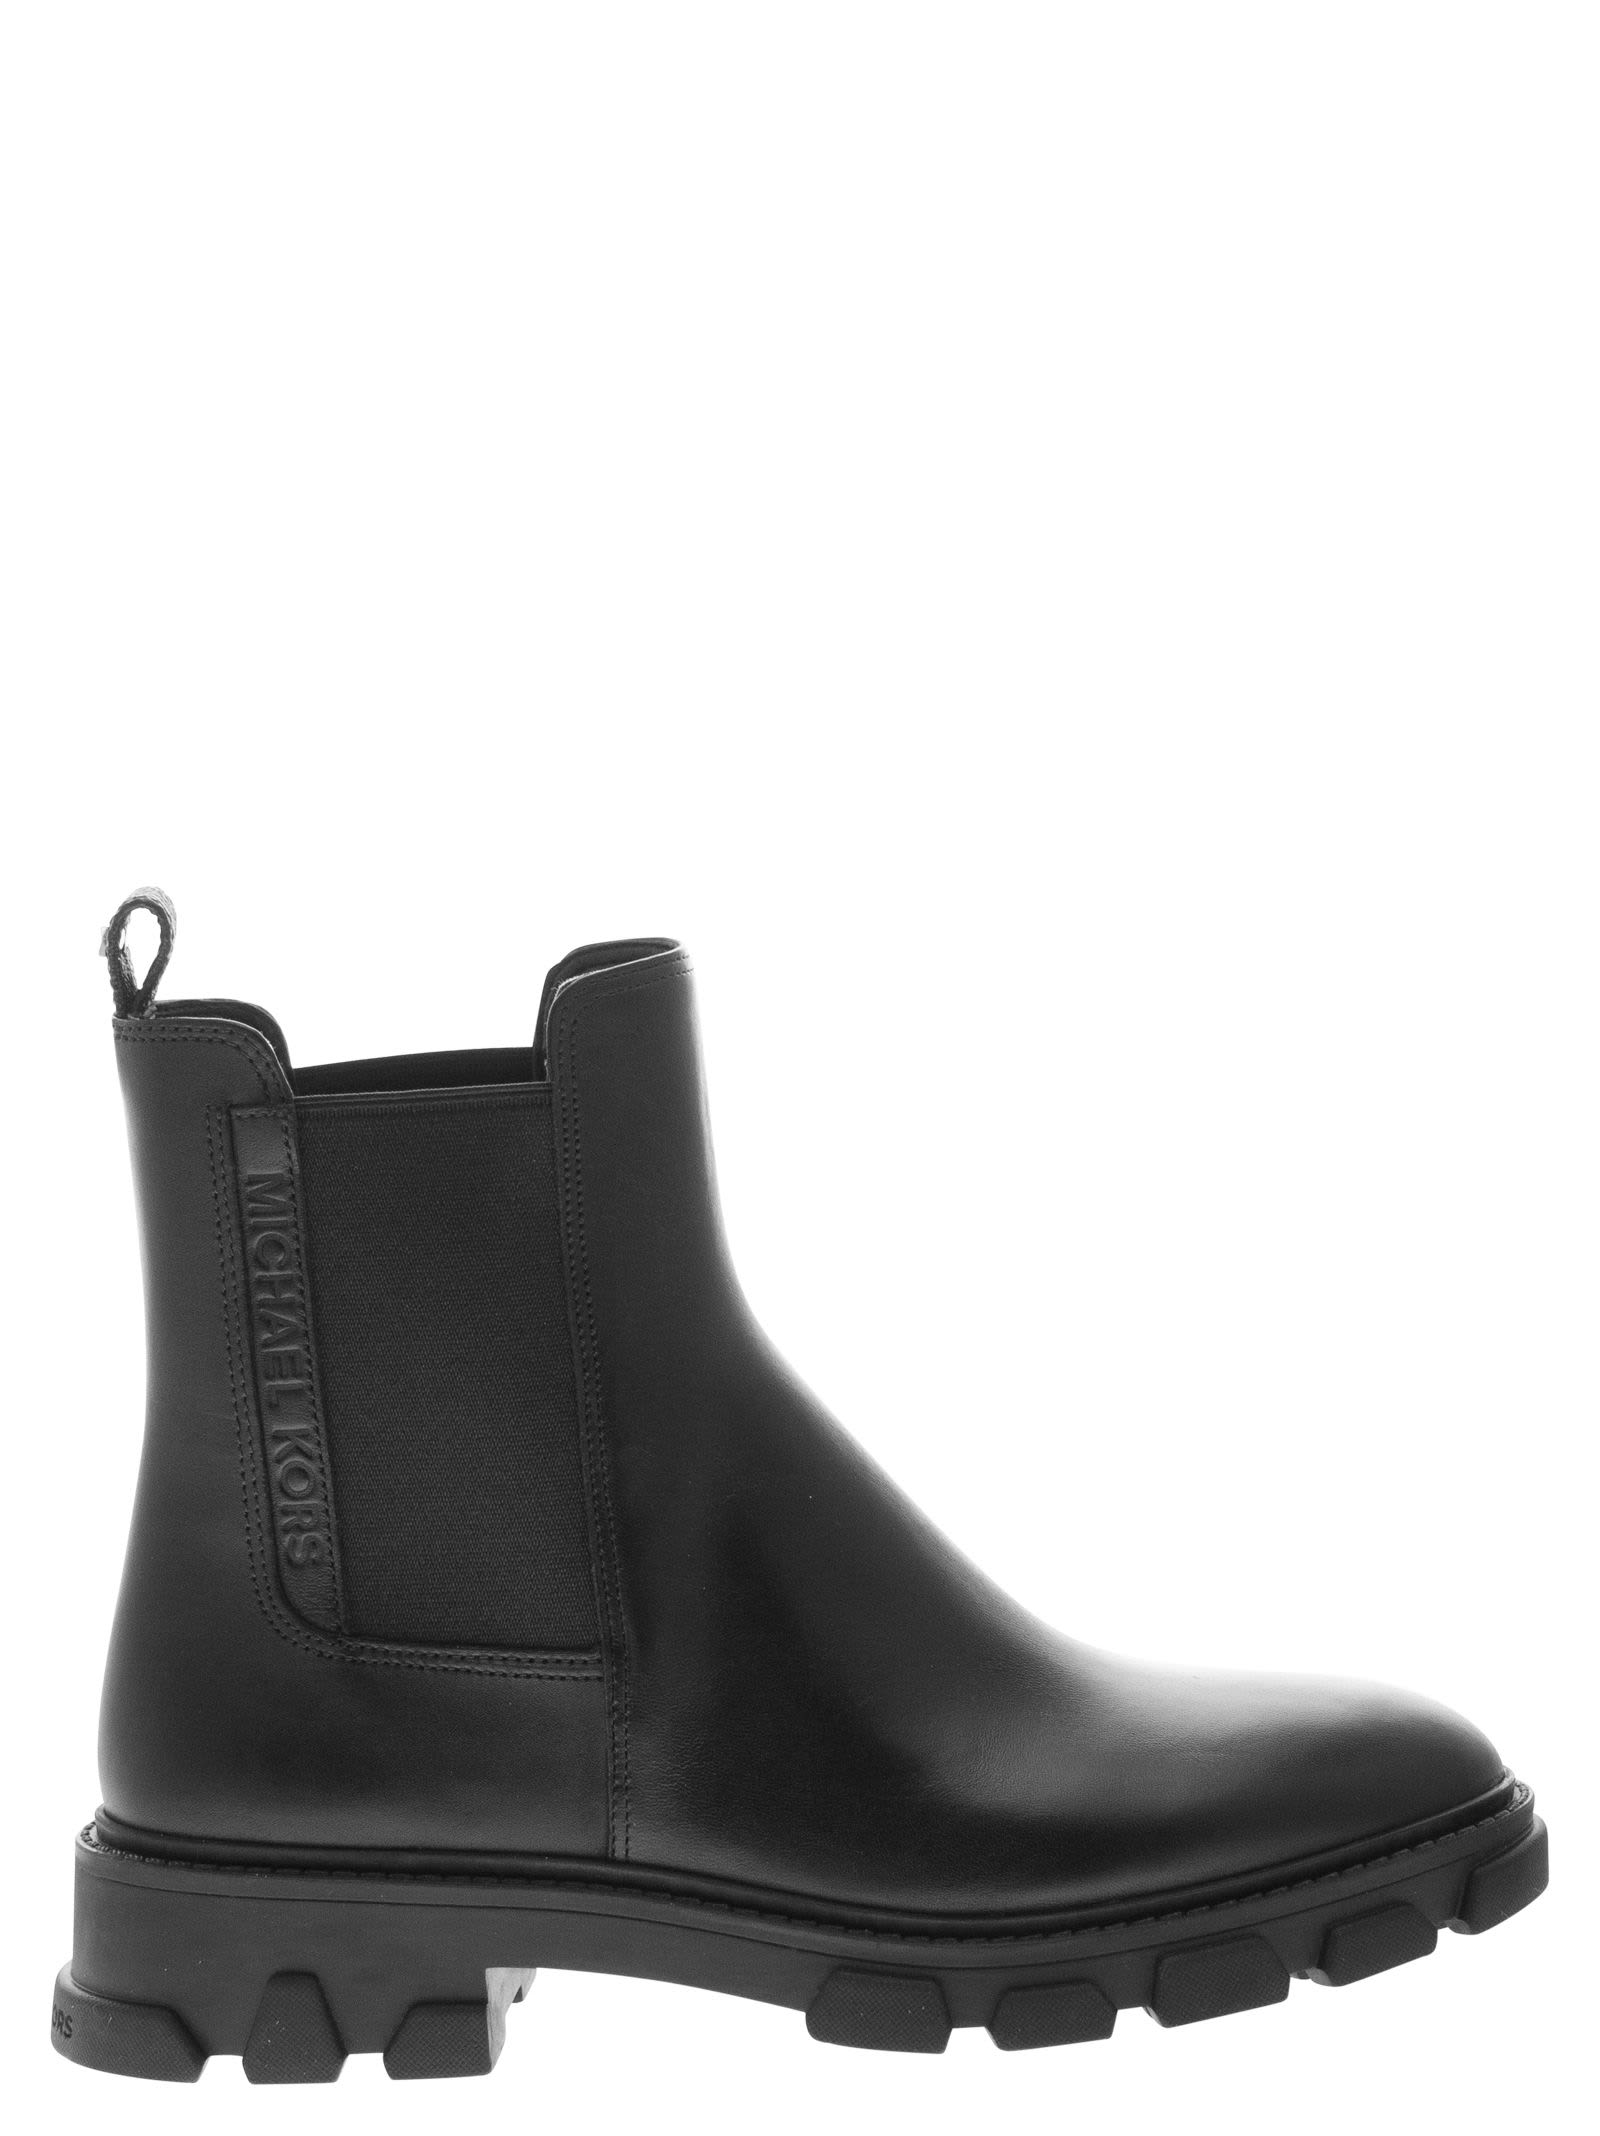 Michael Kors Ridley - Leather Ankle Boot